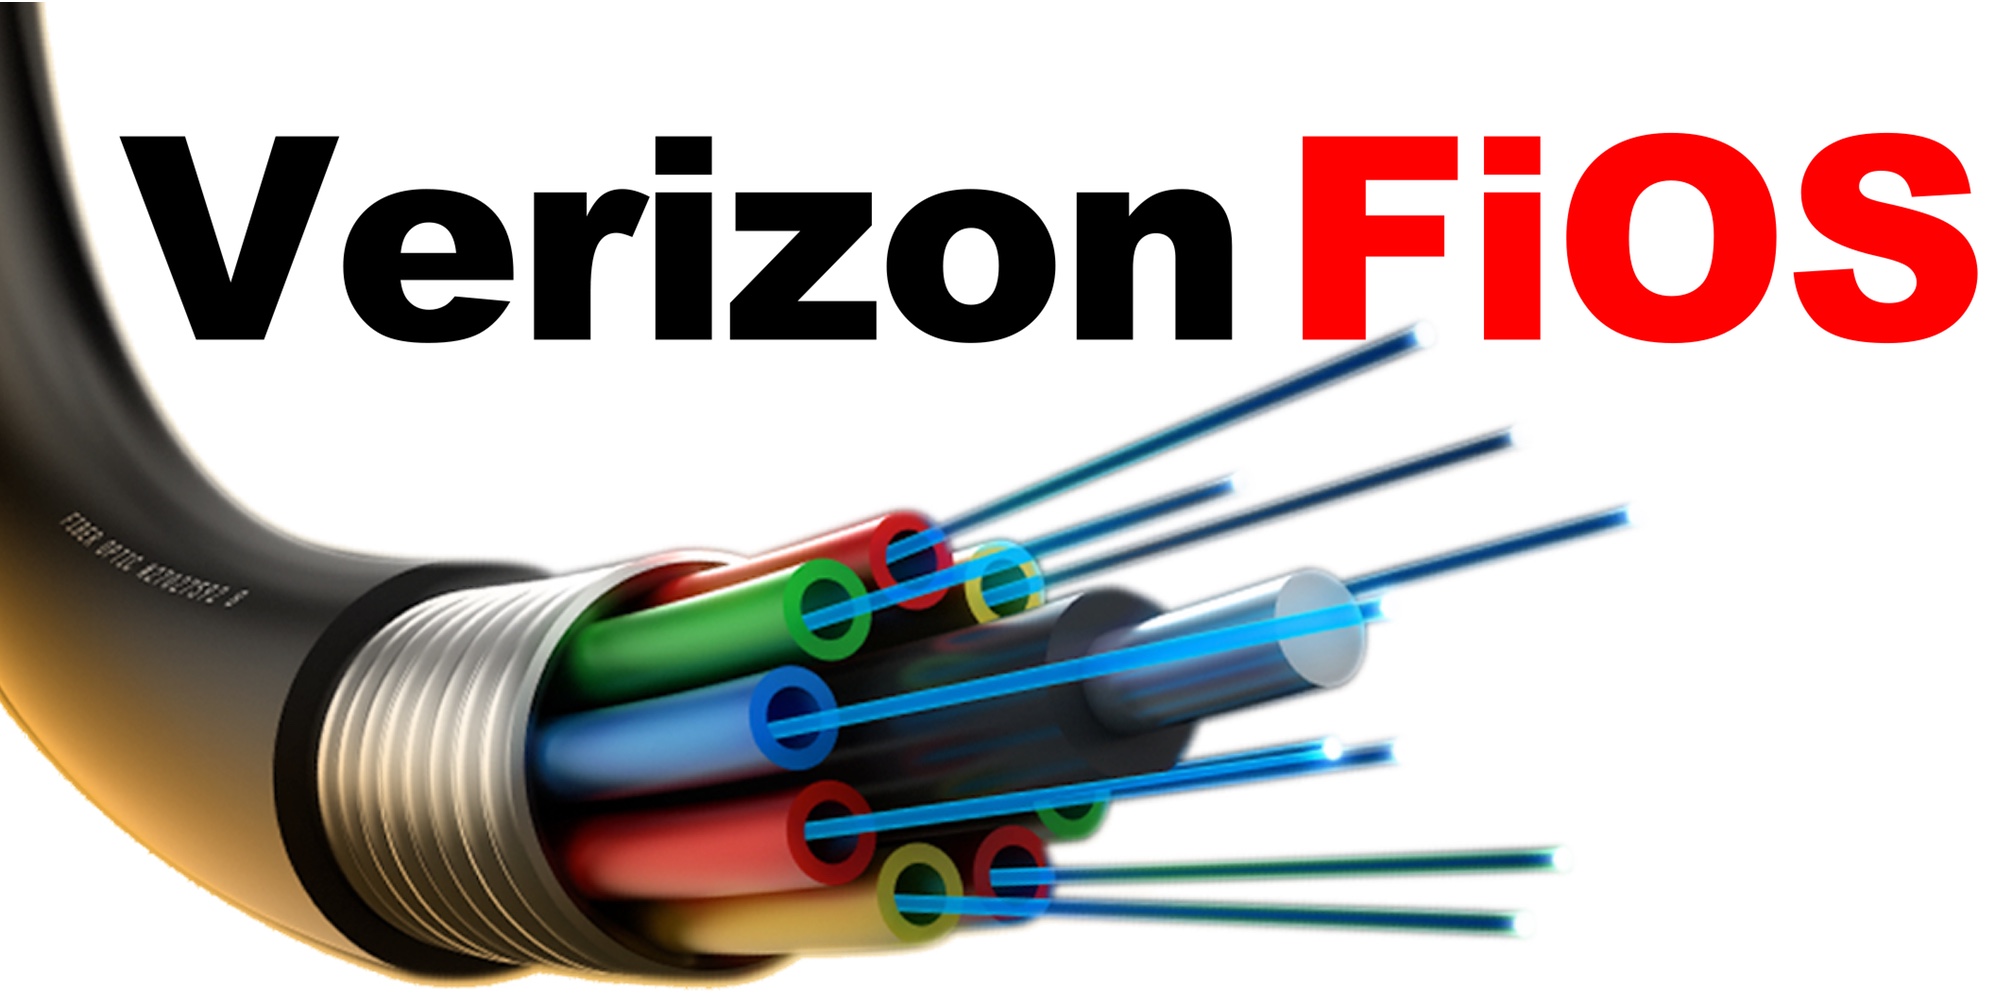 Verizon Fios now offers 100/100 for 40 a month (20 off)